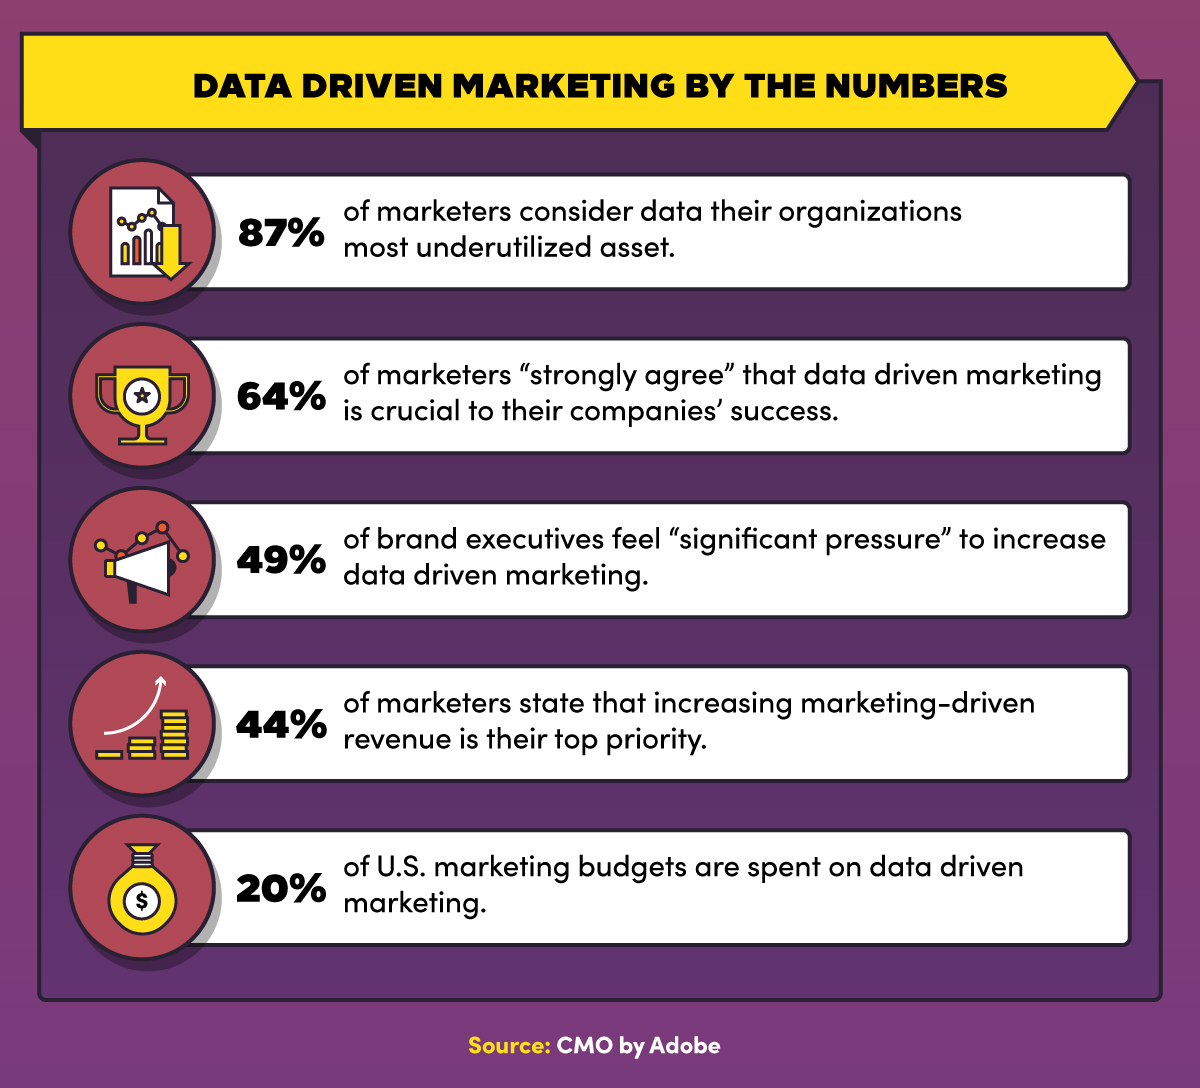 Forbes found that companies that embrace data-driven marketing